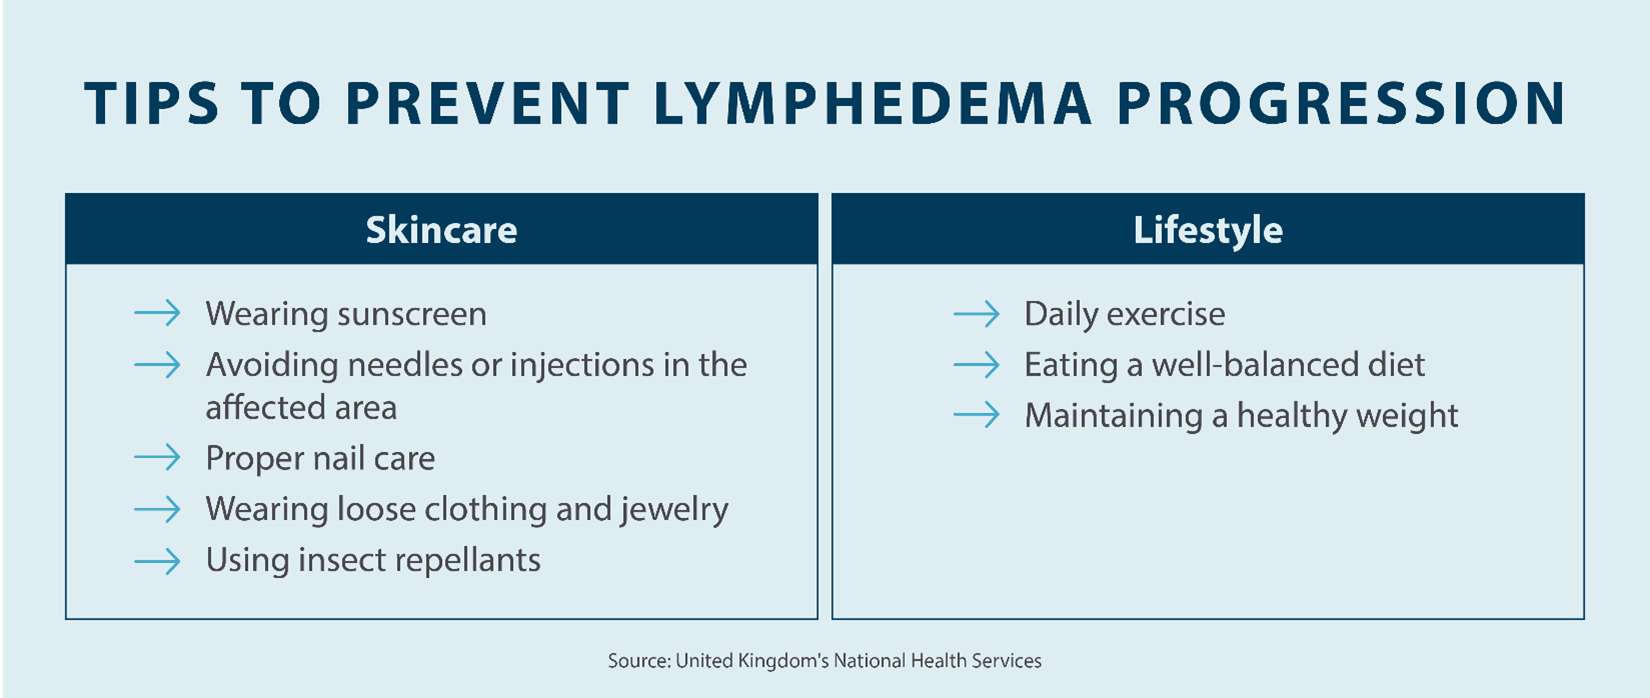 tips to prevent lymphedema progression, skincare and lifestyle tips Source United Kingdom's National Health Services